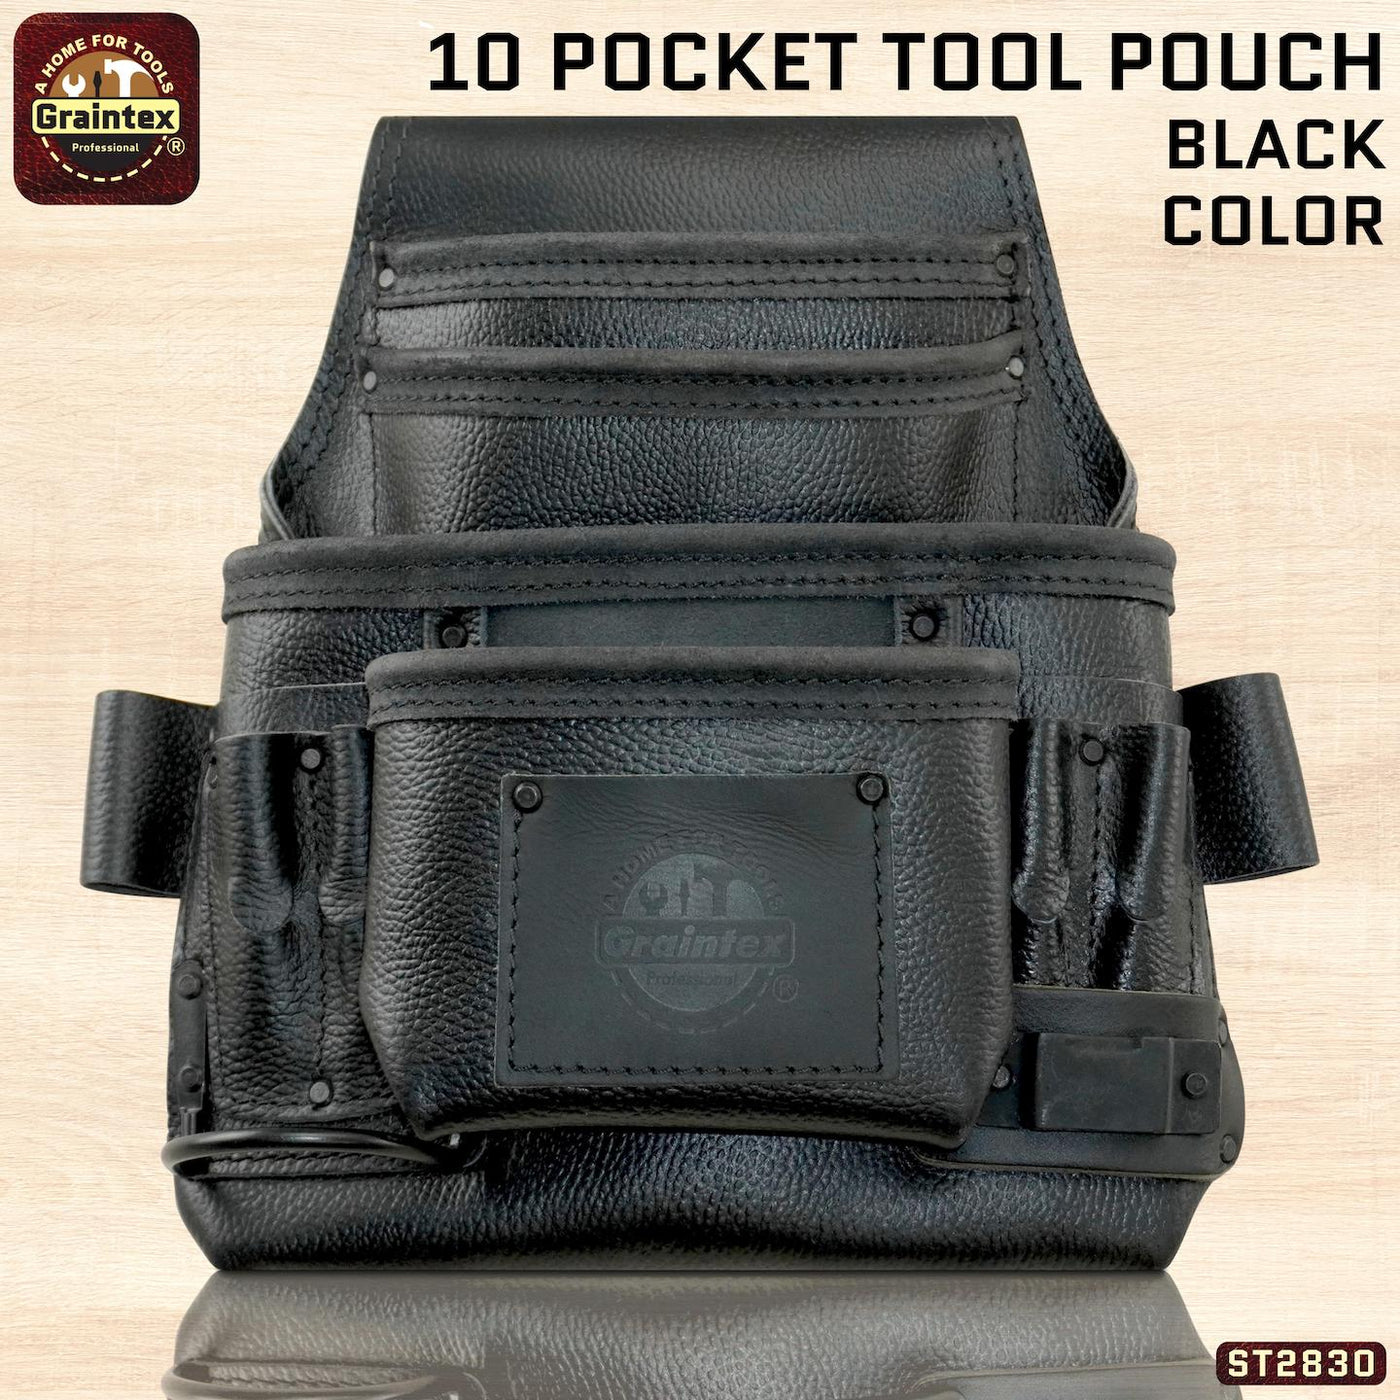 ST2830 :: 10 Pocket Nail & Tool Pouch Black Color RUGGED Top Grain Leather